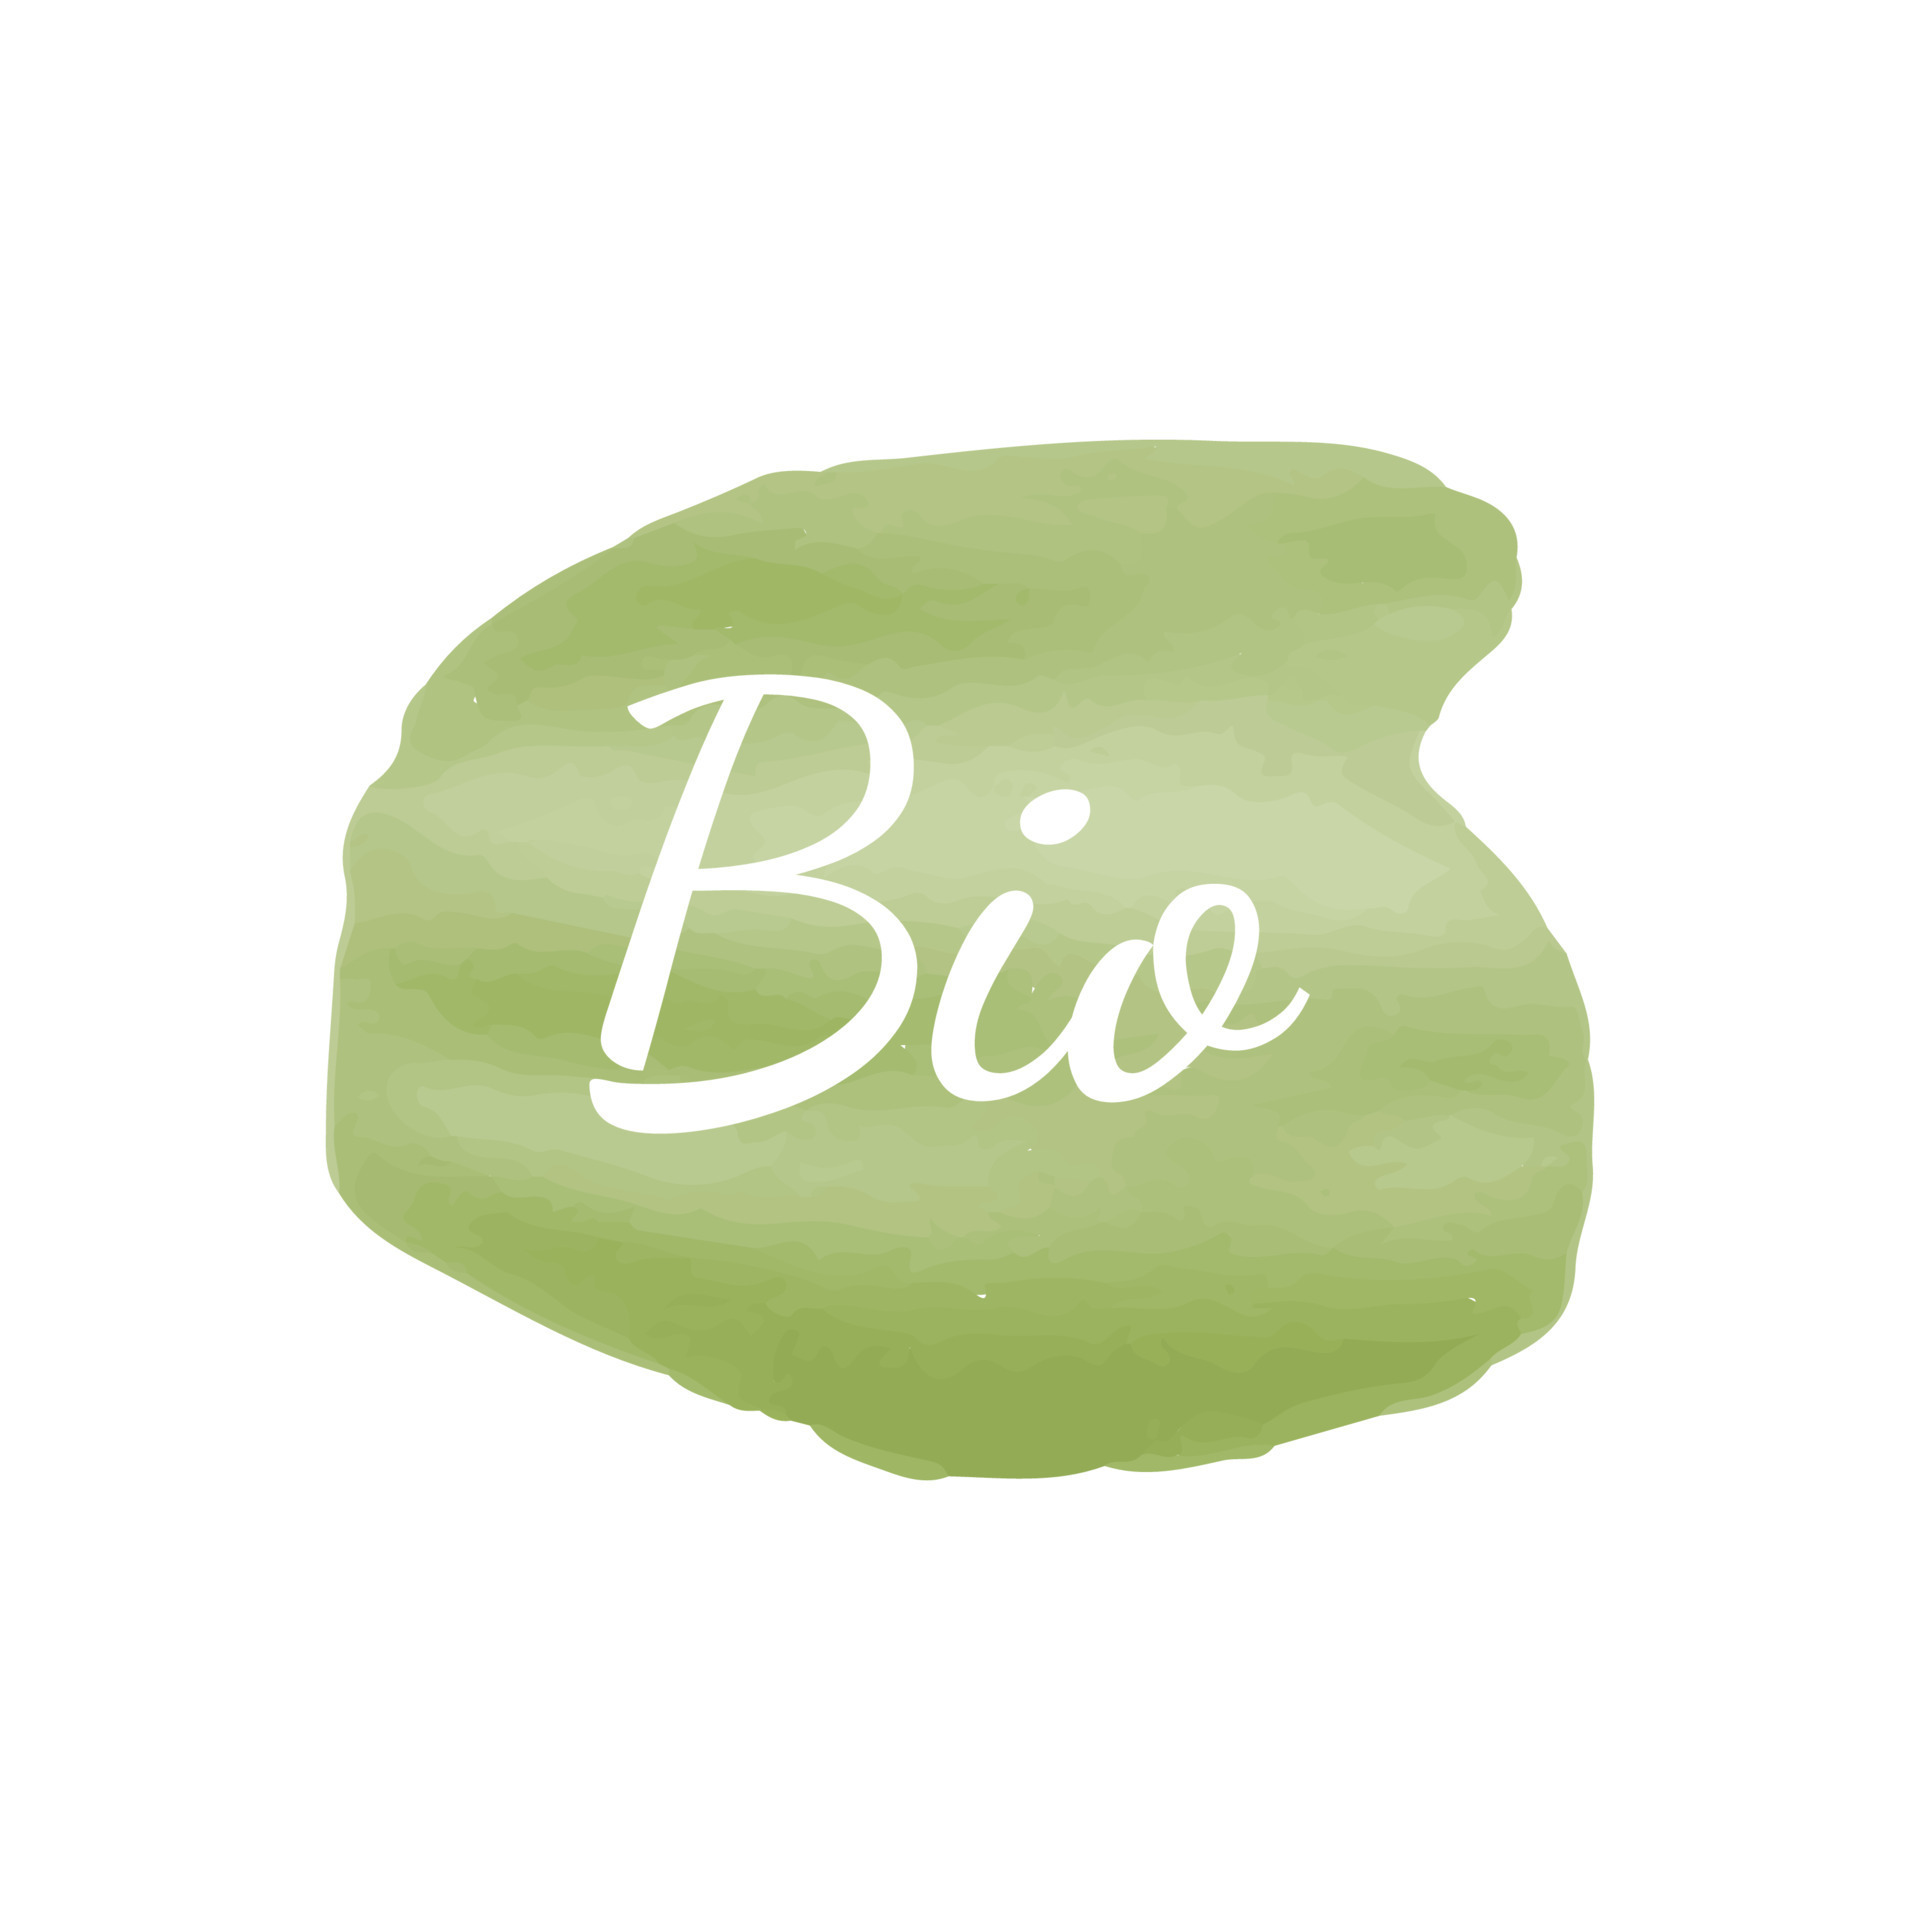 Bio label, logo with watercolour background. Organic, natural product